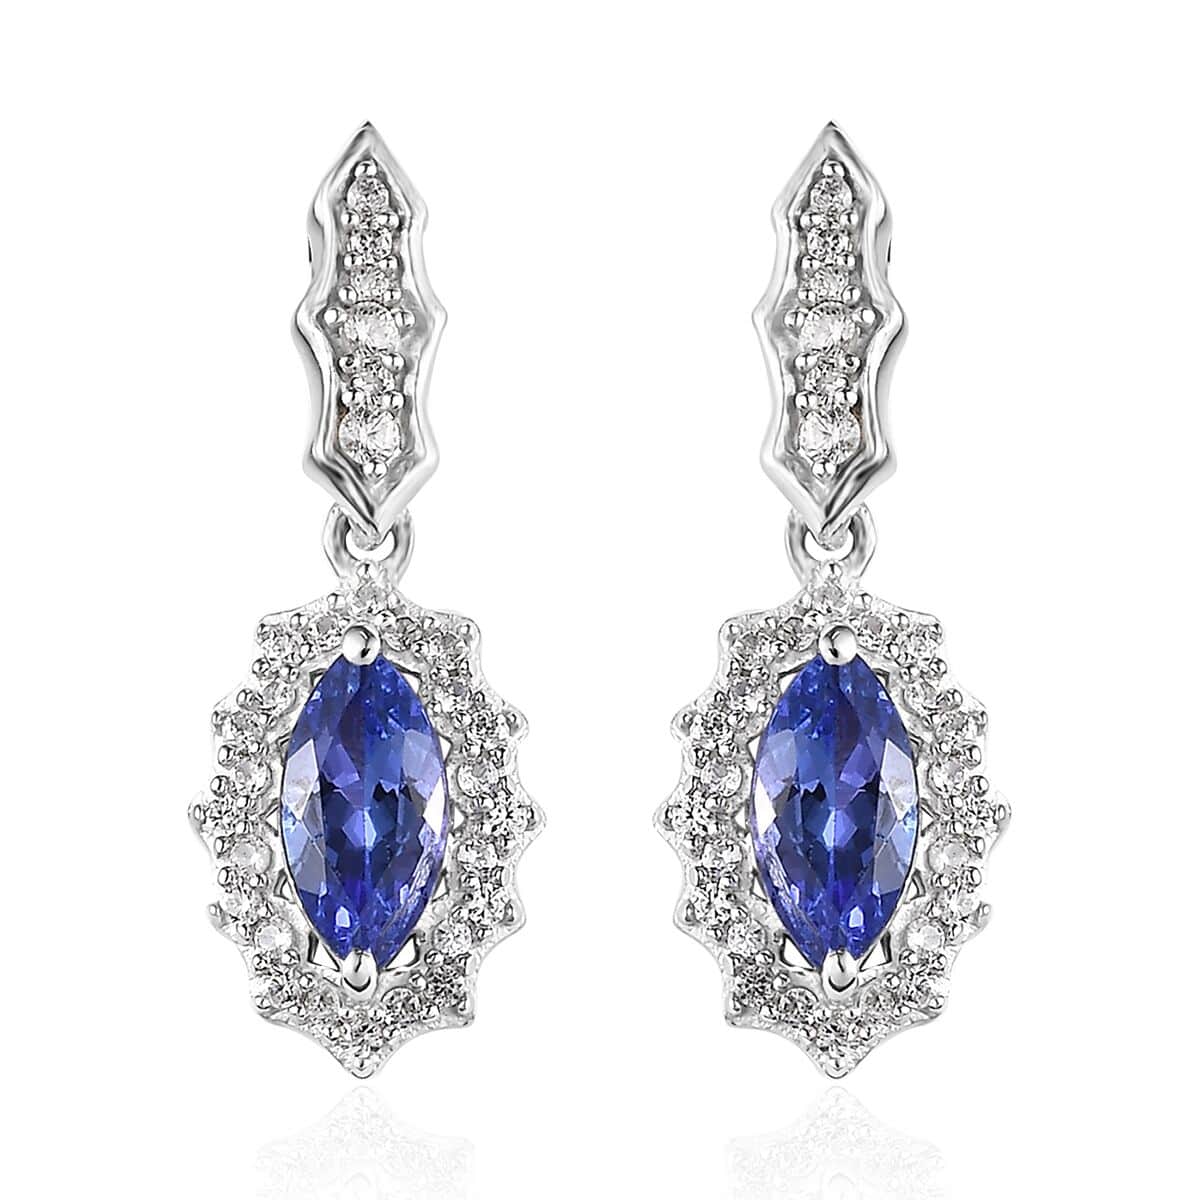 Buy AAA Tanzanite and White Zircon Earrings in Platinum Over Sterling ...